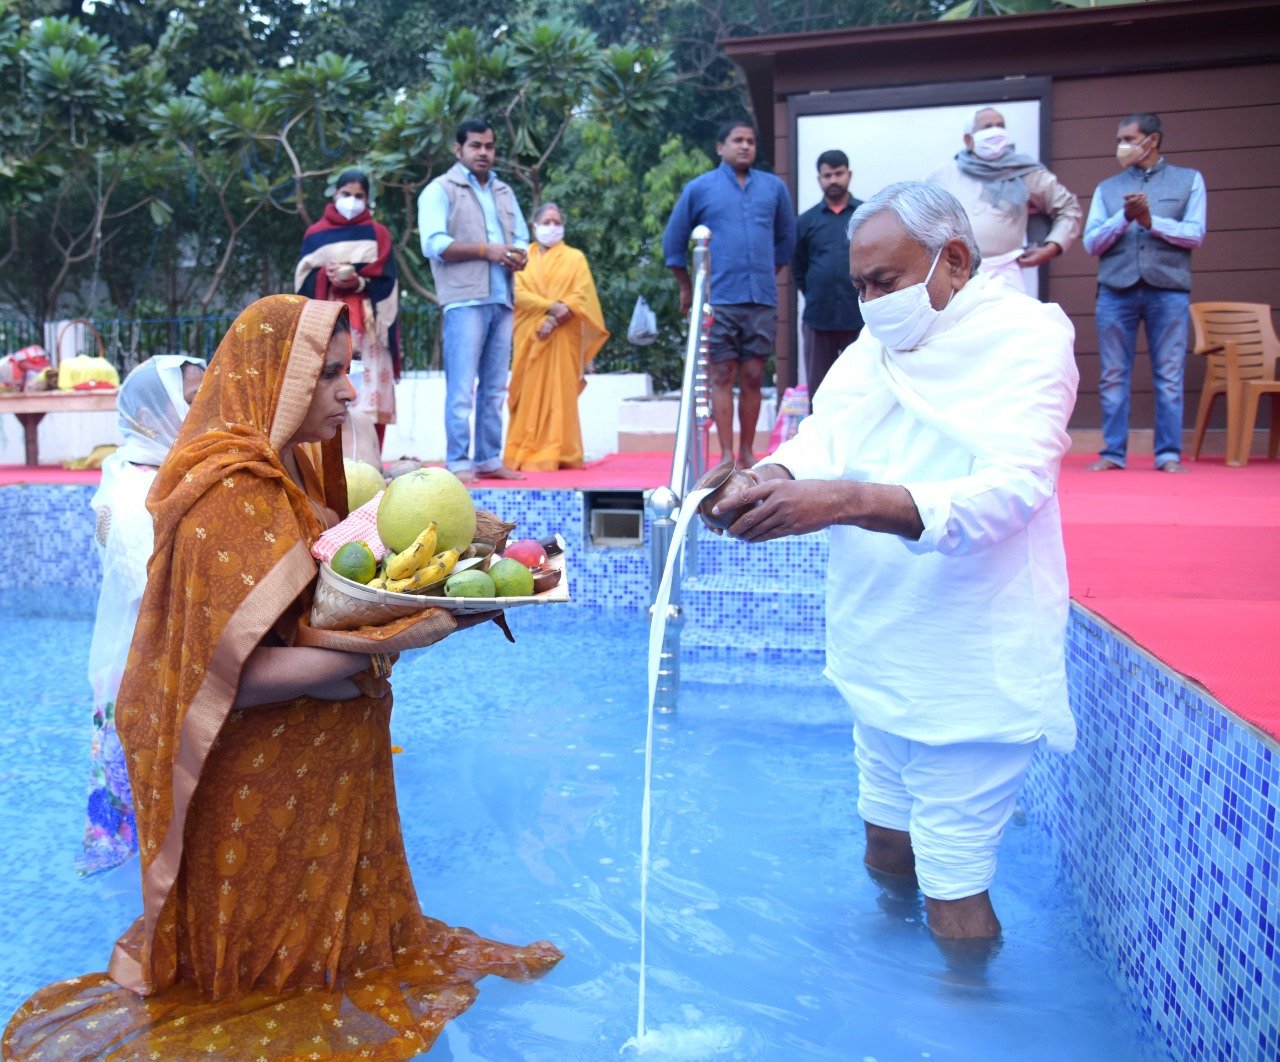 Chhath Puja concludes with prayers to the rising sun